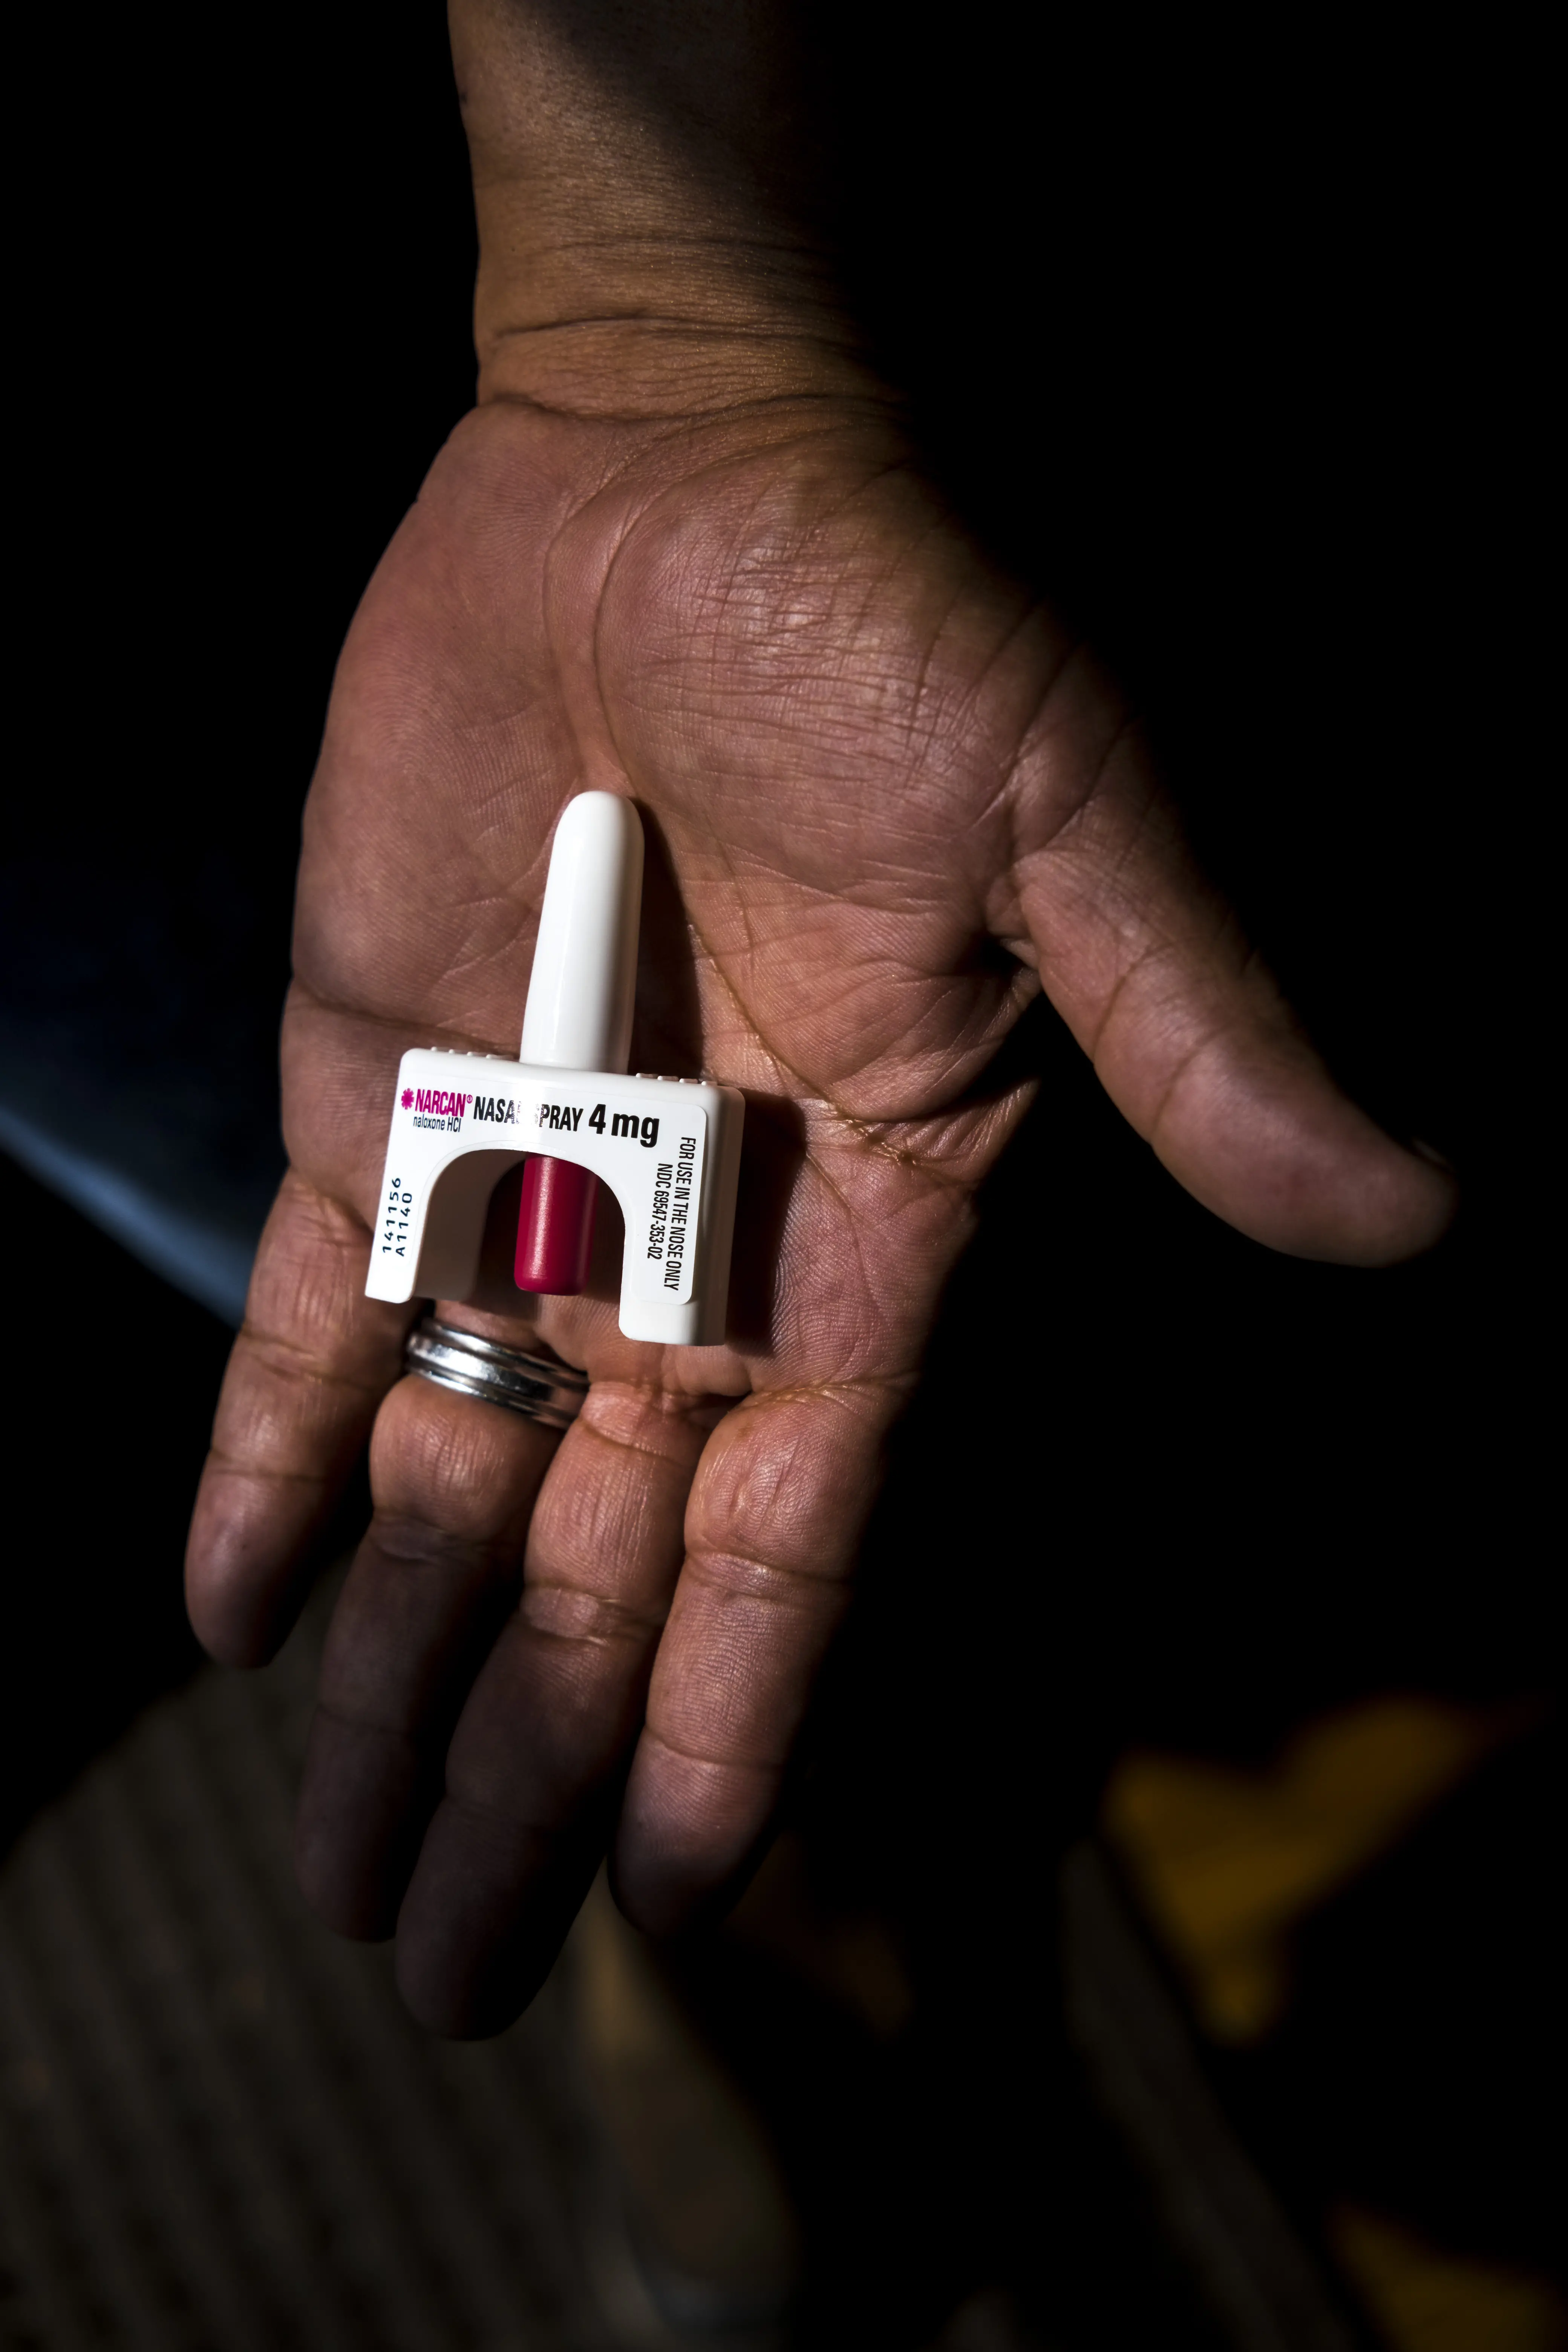 Naloxone spray in a hand glinting in a column of light.